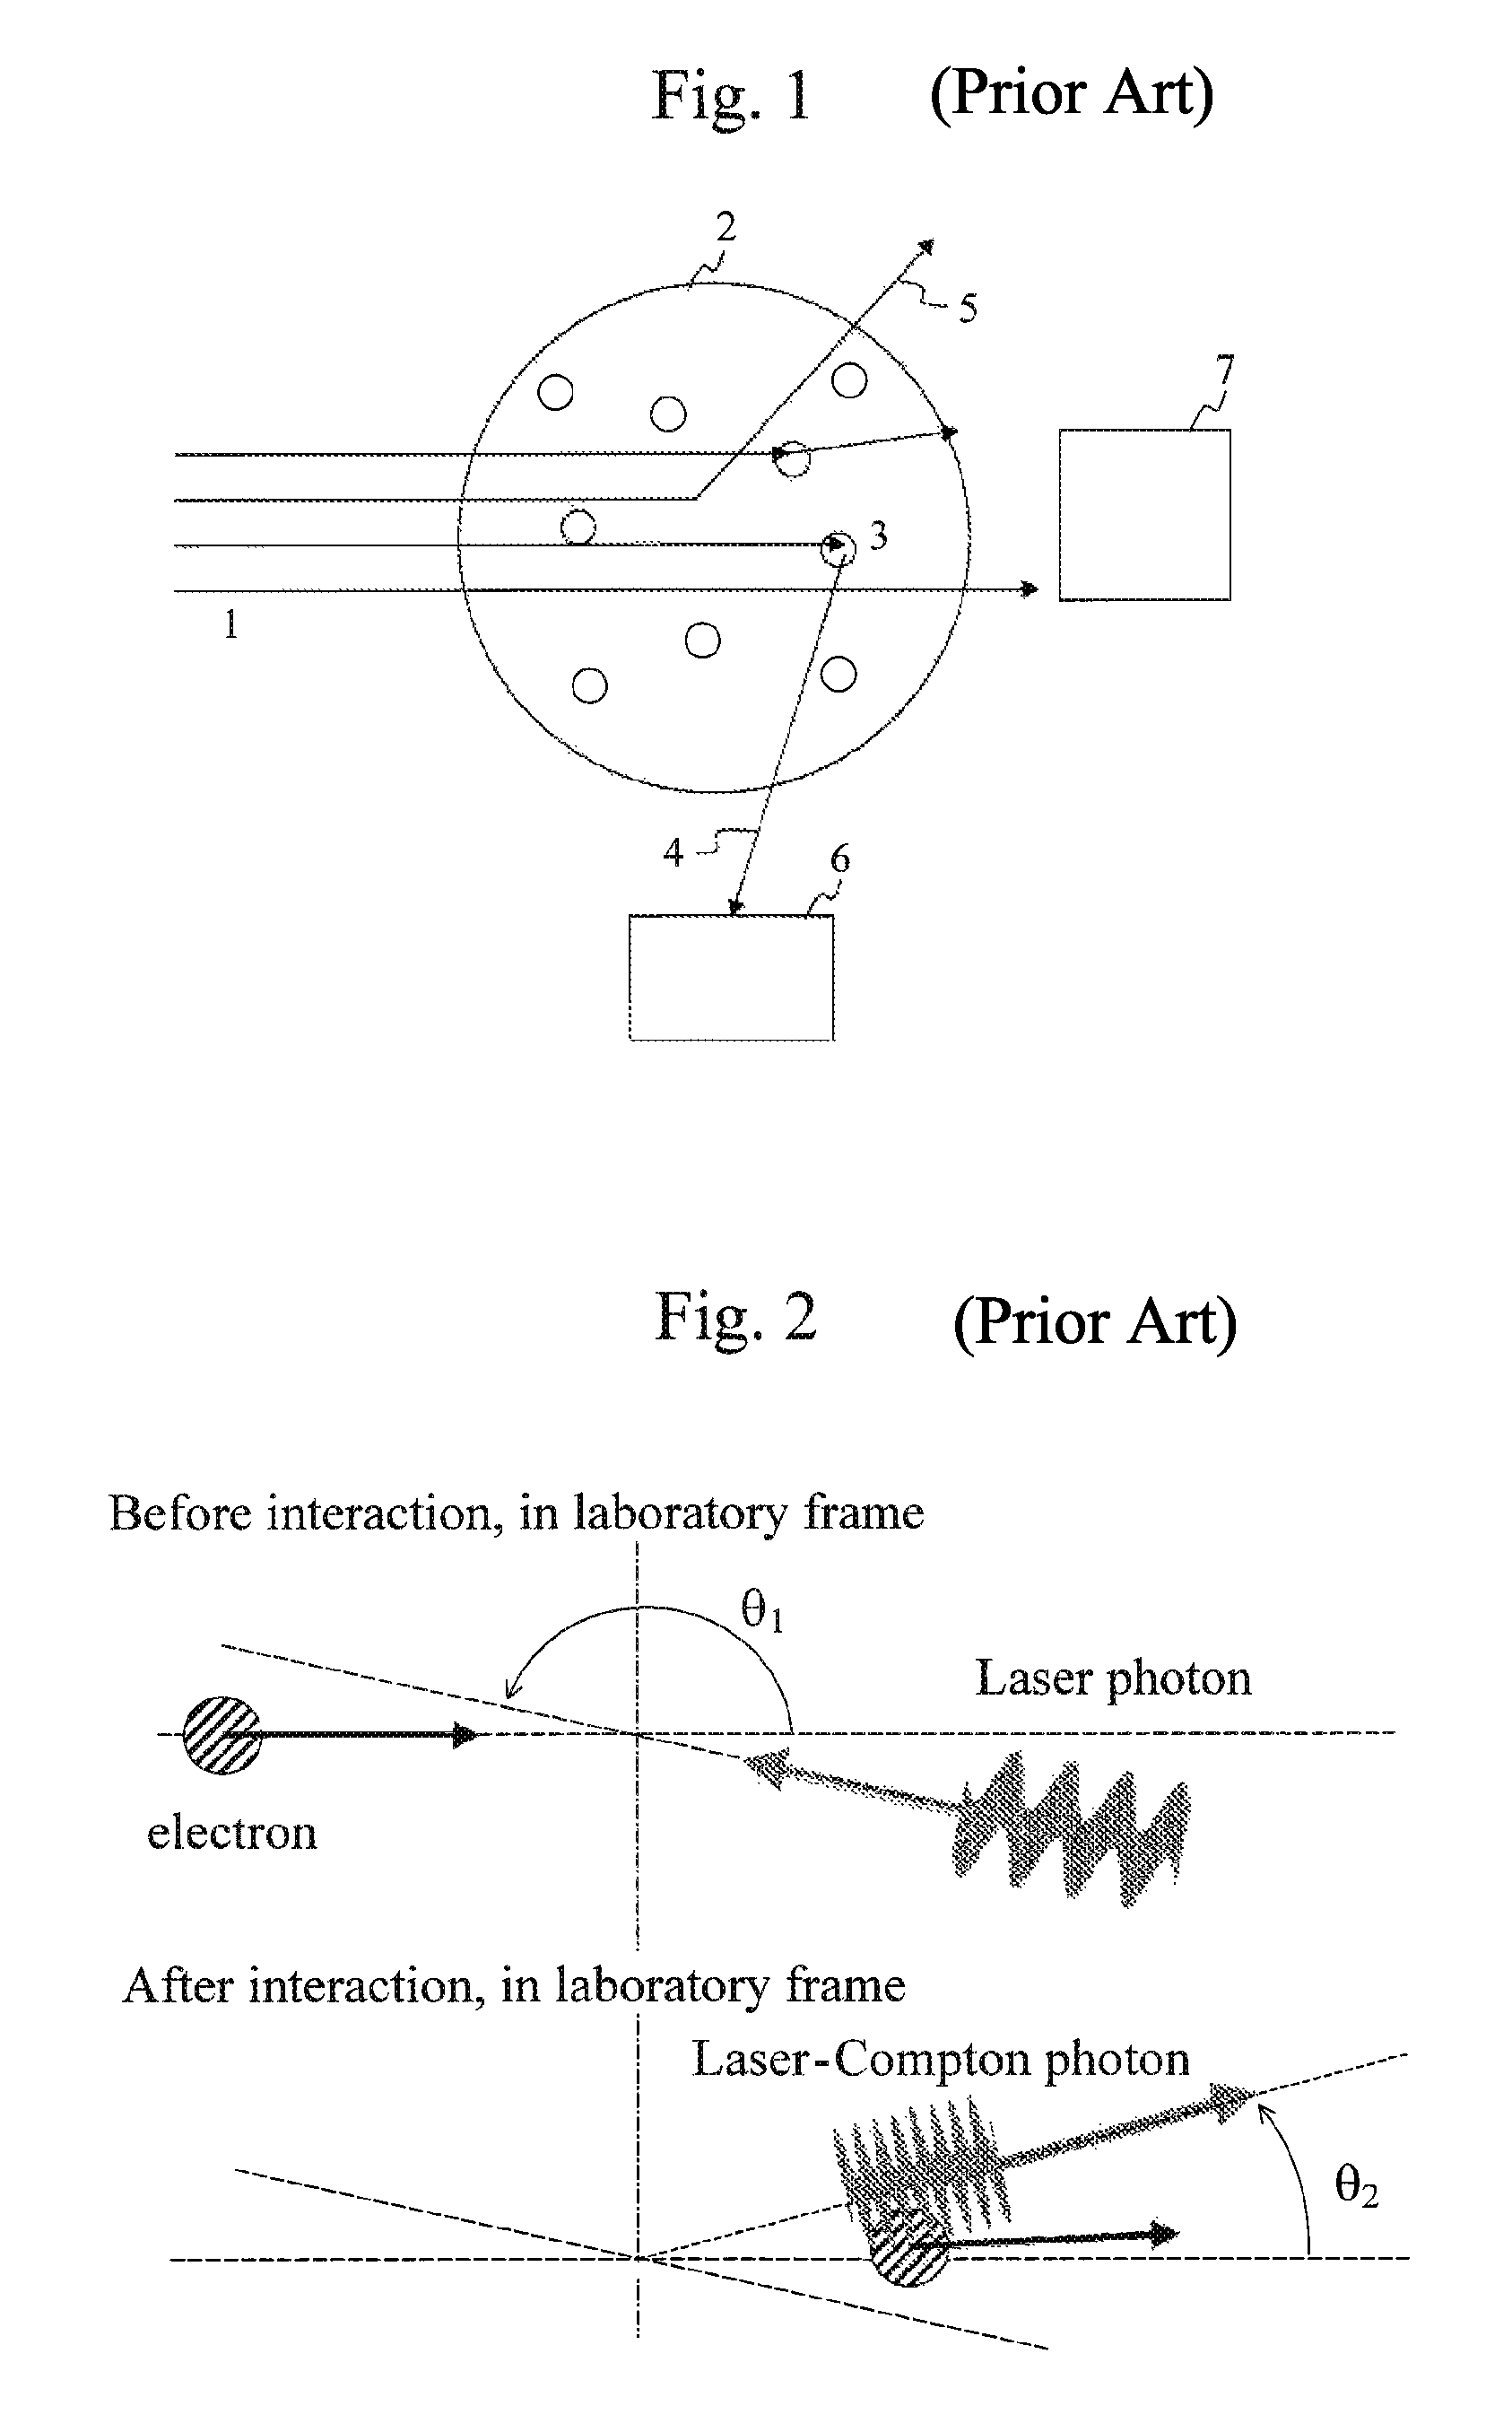 Nondestructive inspection system using nuclear resonance fluorescence